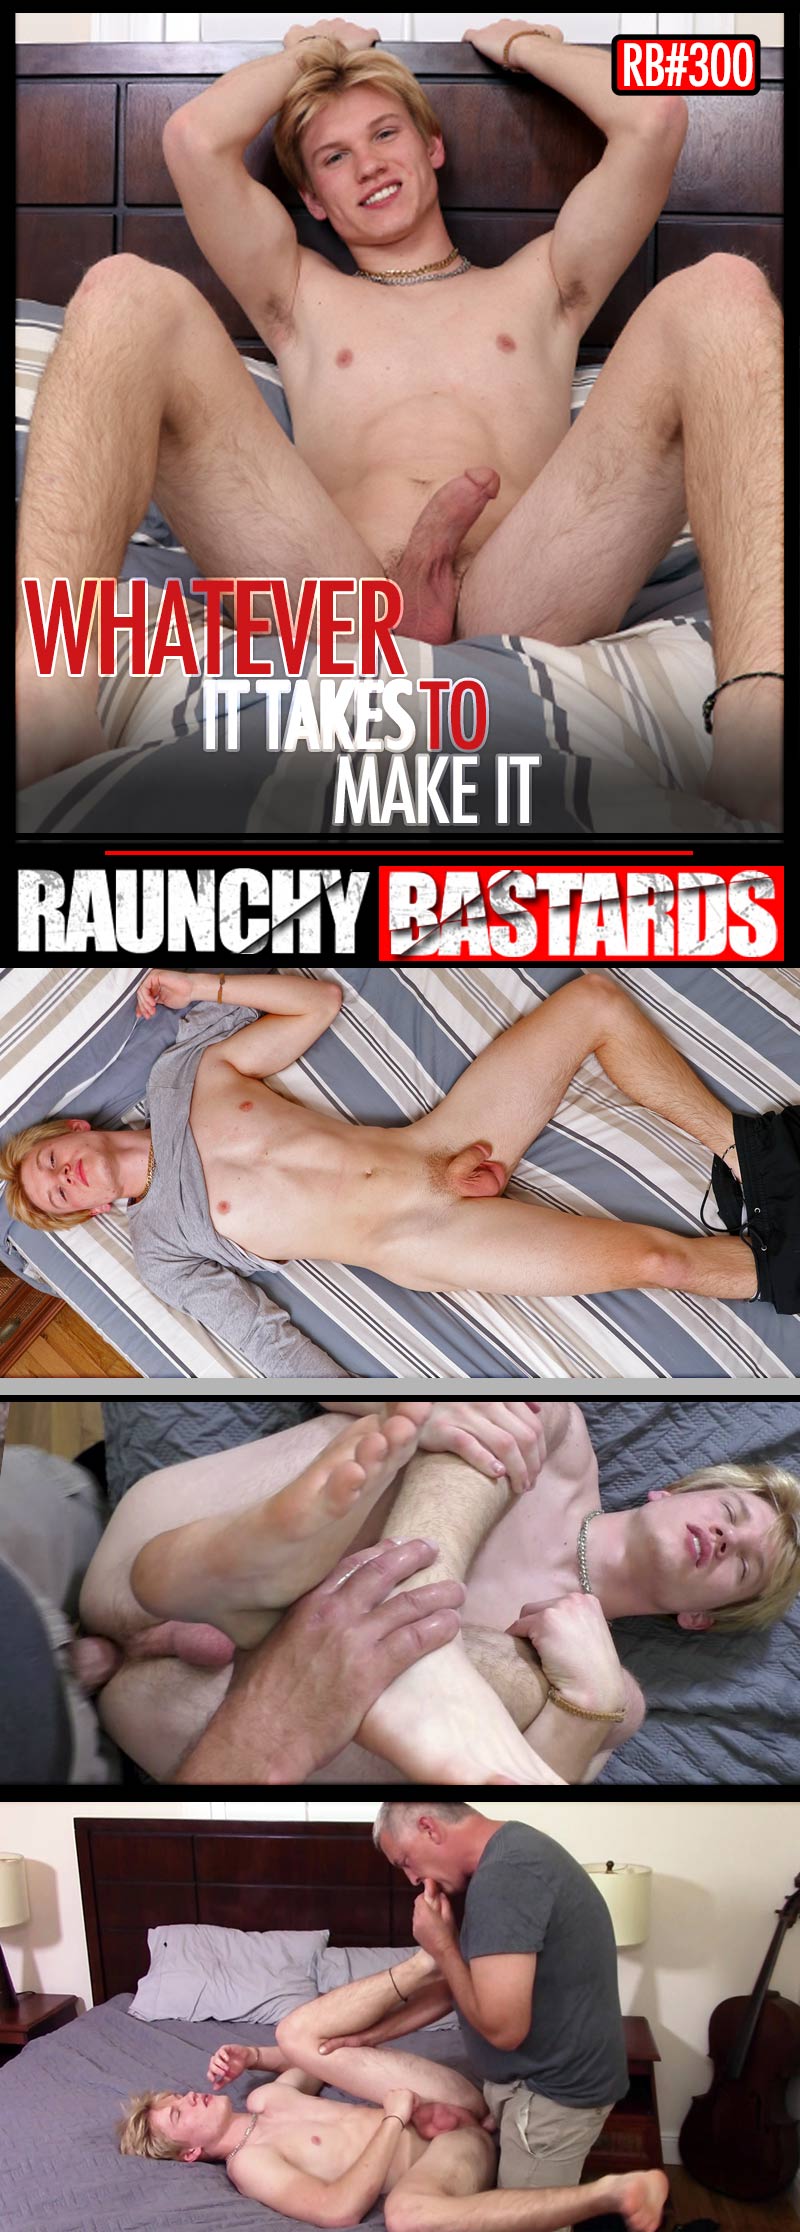 Episode 300: Clay Fucks Tyler Blue in 'Whatever It Takes To Make It!' at Raunch Bastards